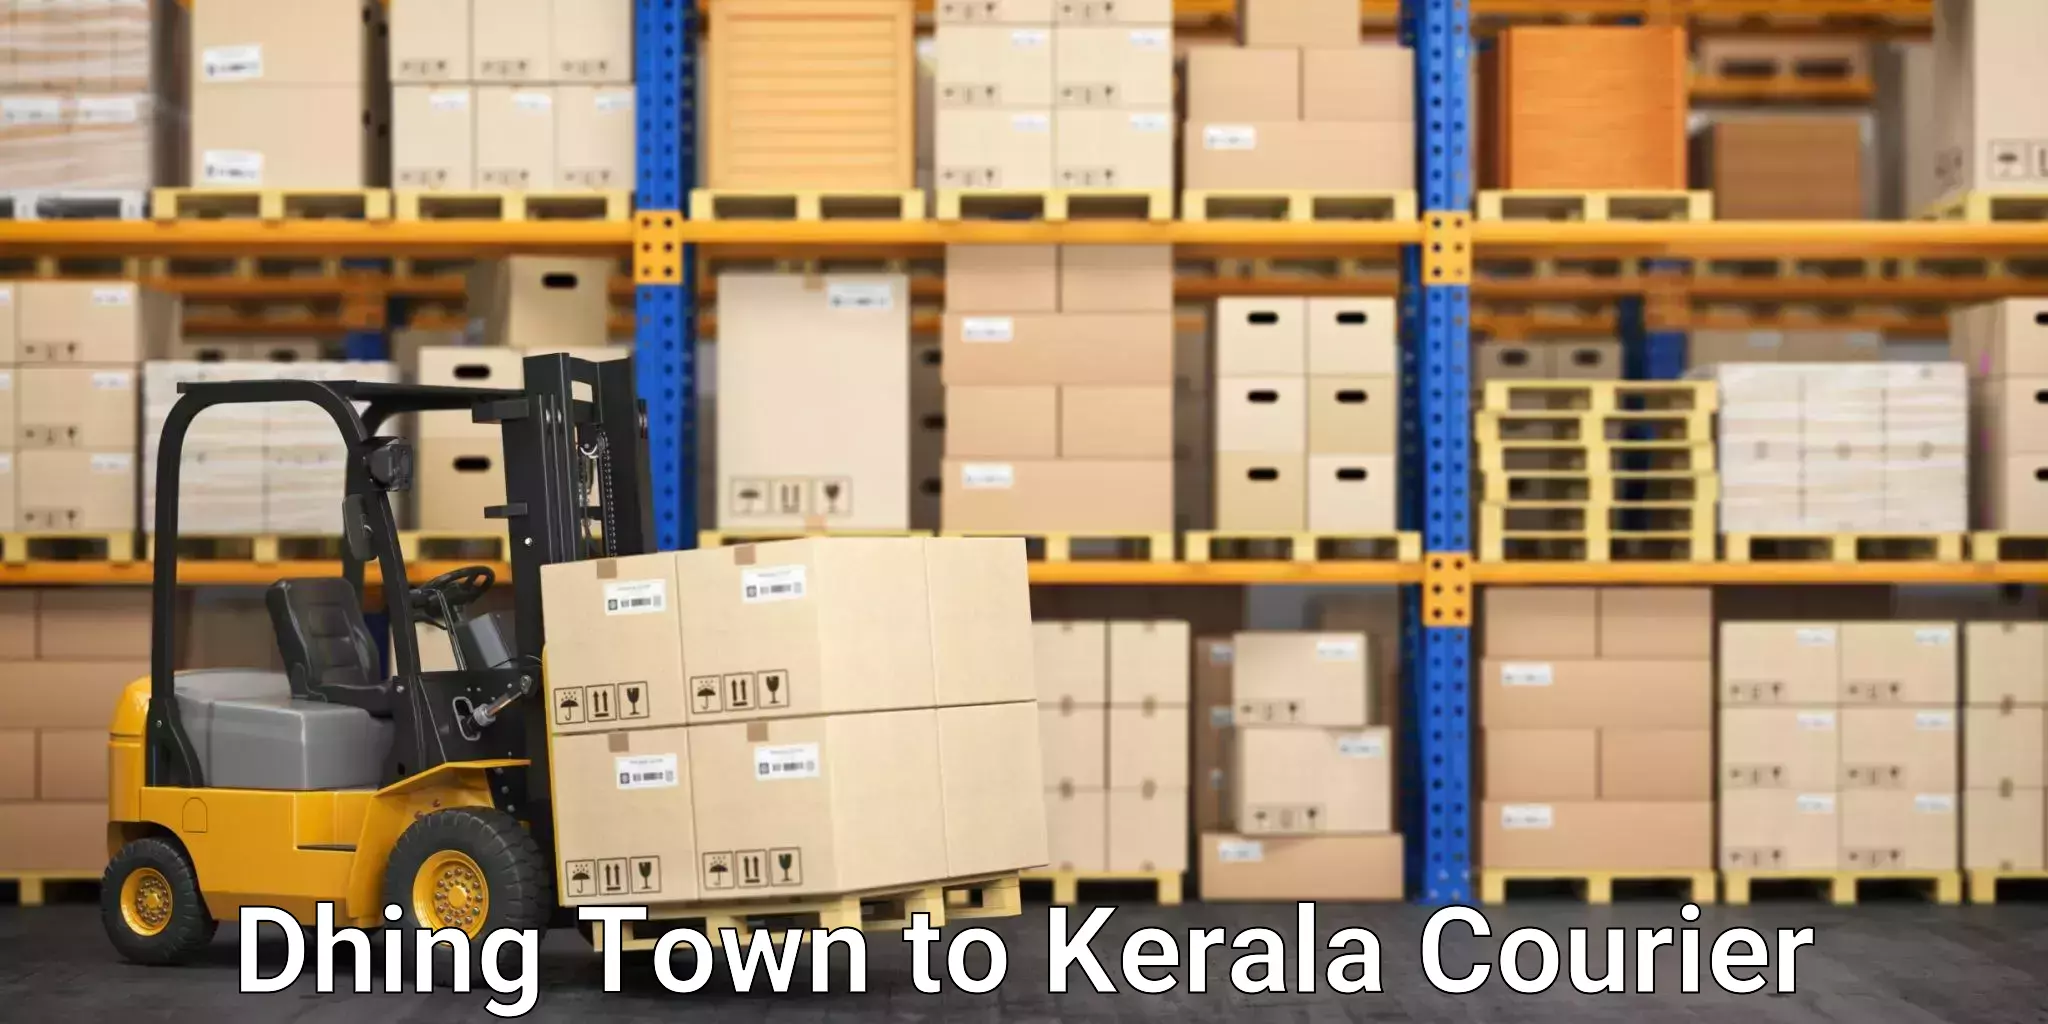 Express delivery solutions Dhing Town to Kerala